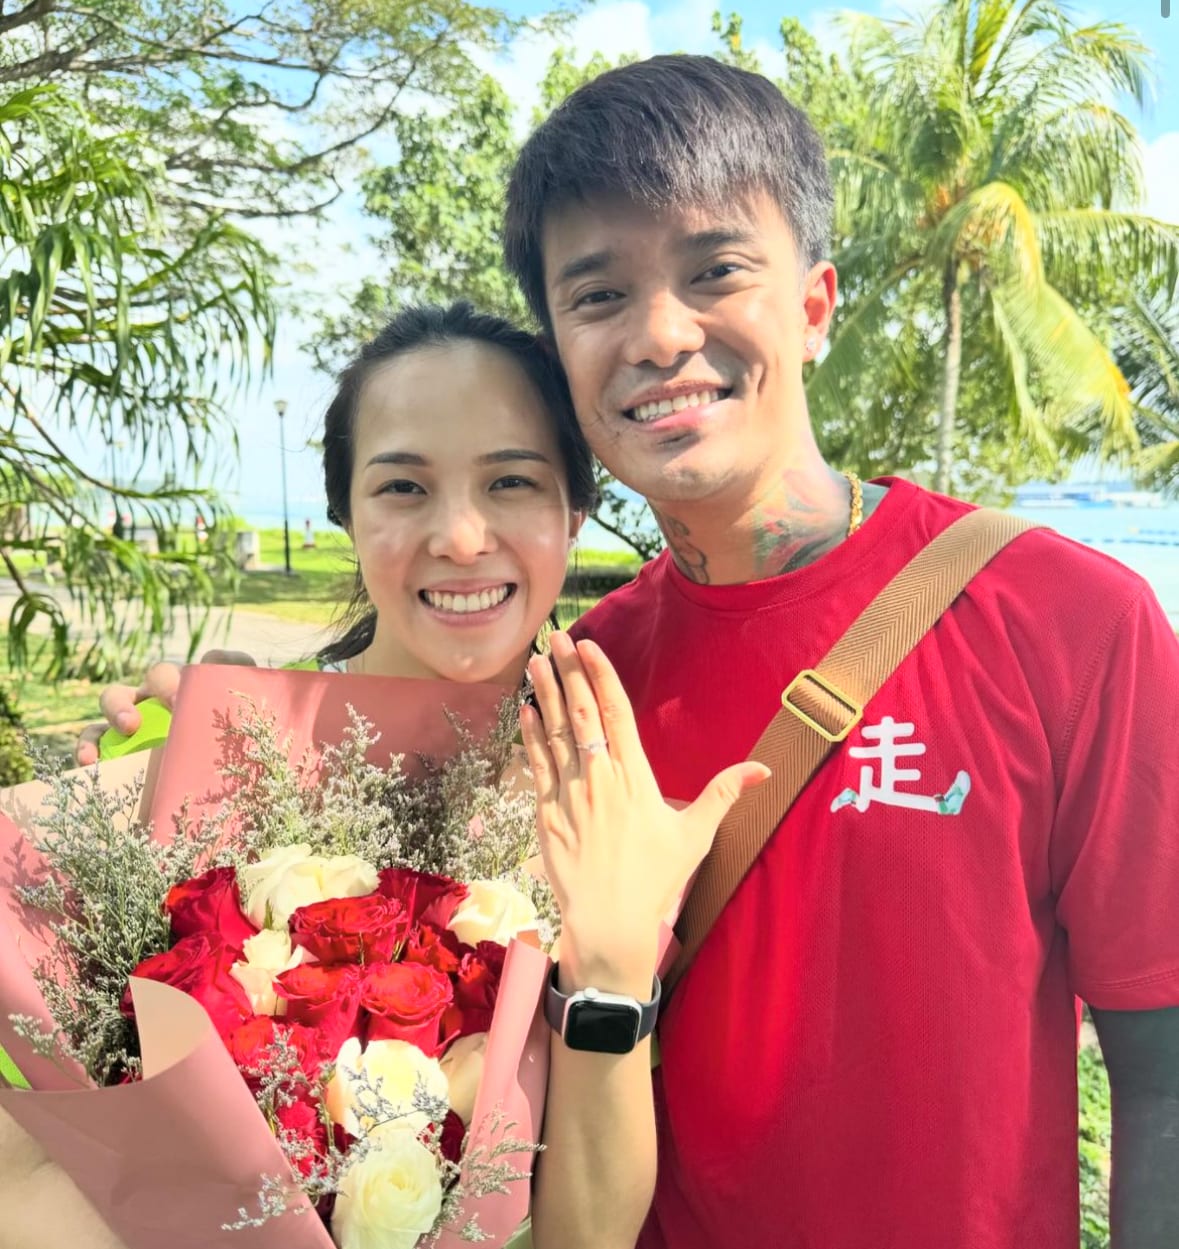 “She Said Yes!”: Simonboy Proposes To Girlfriend During Senior Citizens Sunday Walk